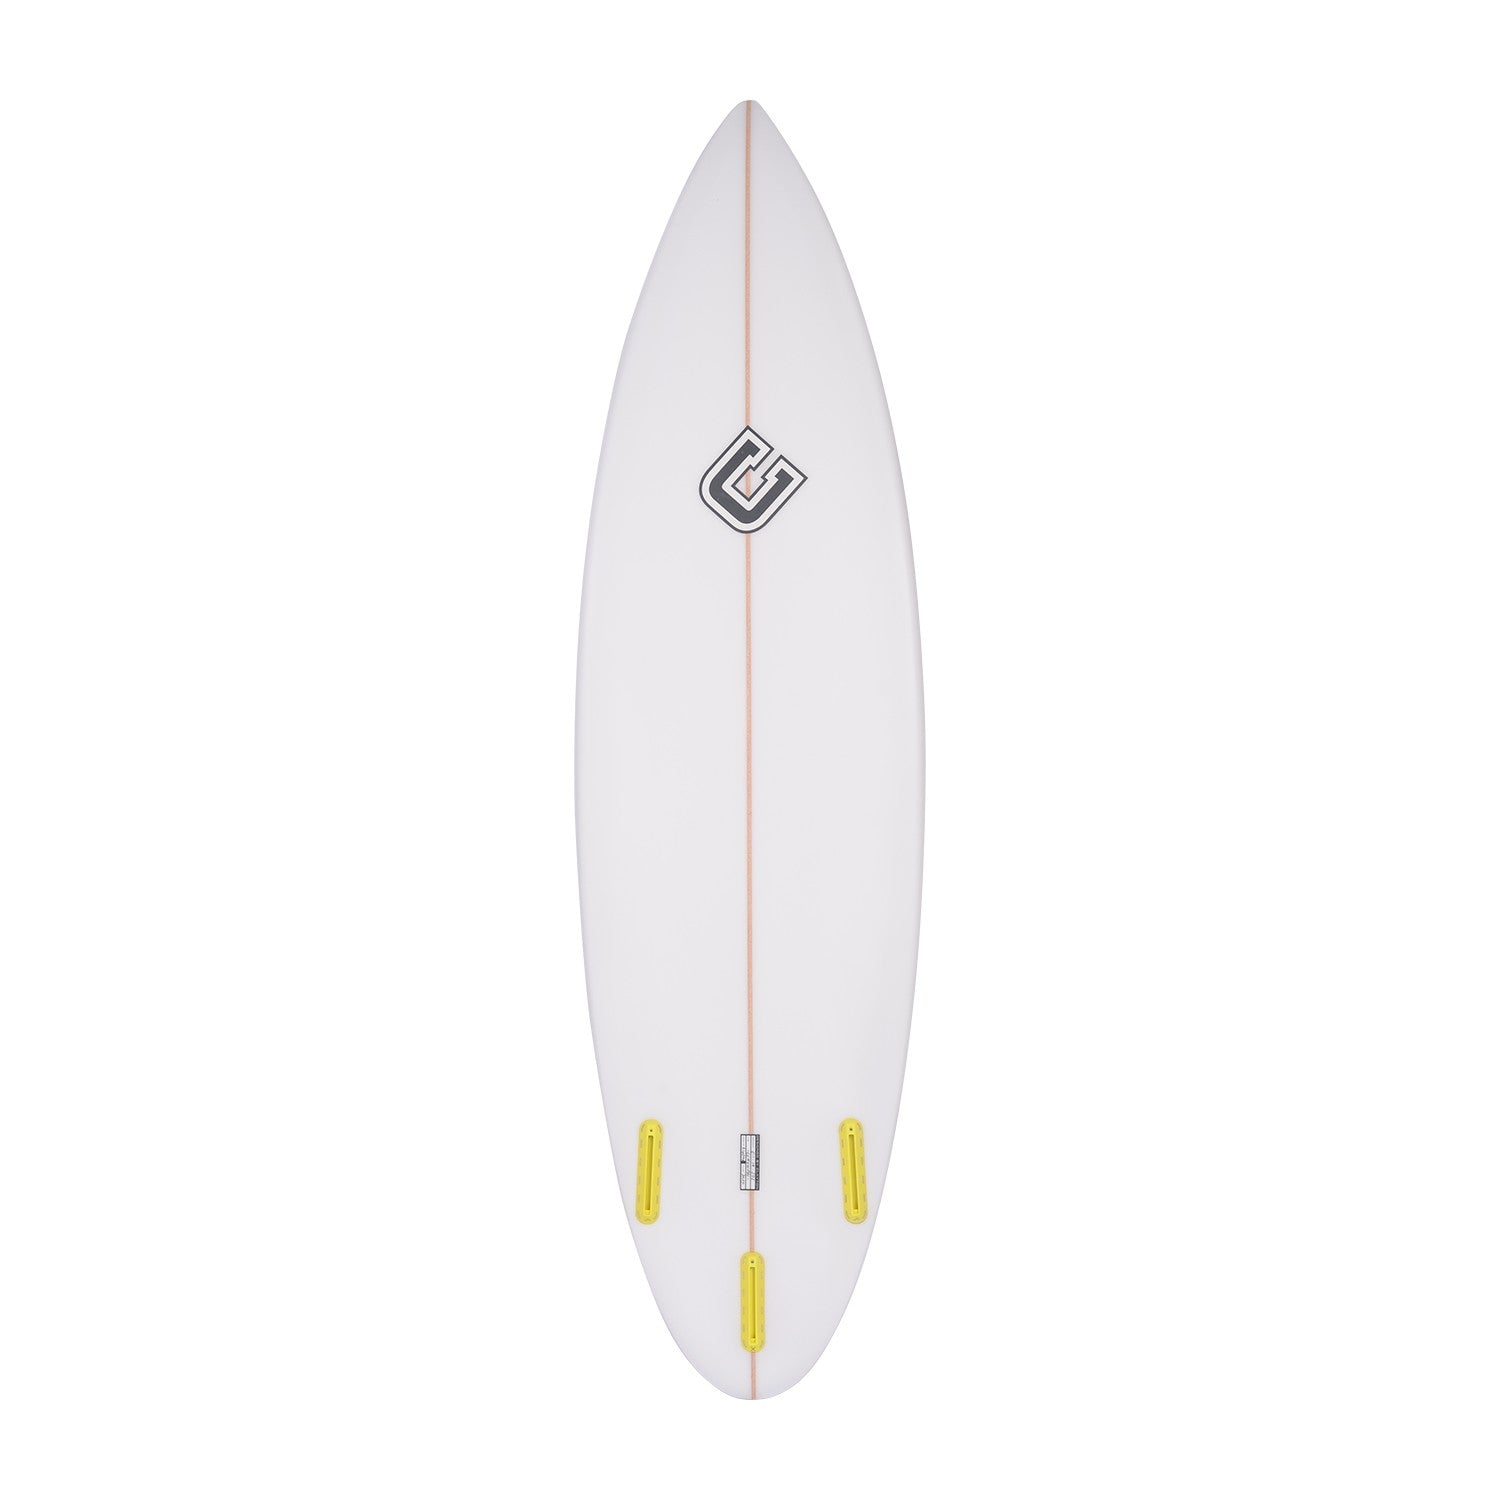 CLAYTON Surfboards - Clay10 Pro (PU) Futures - 5'11